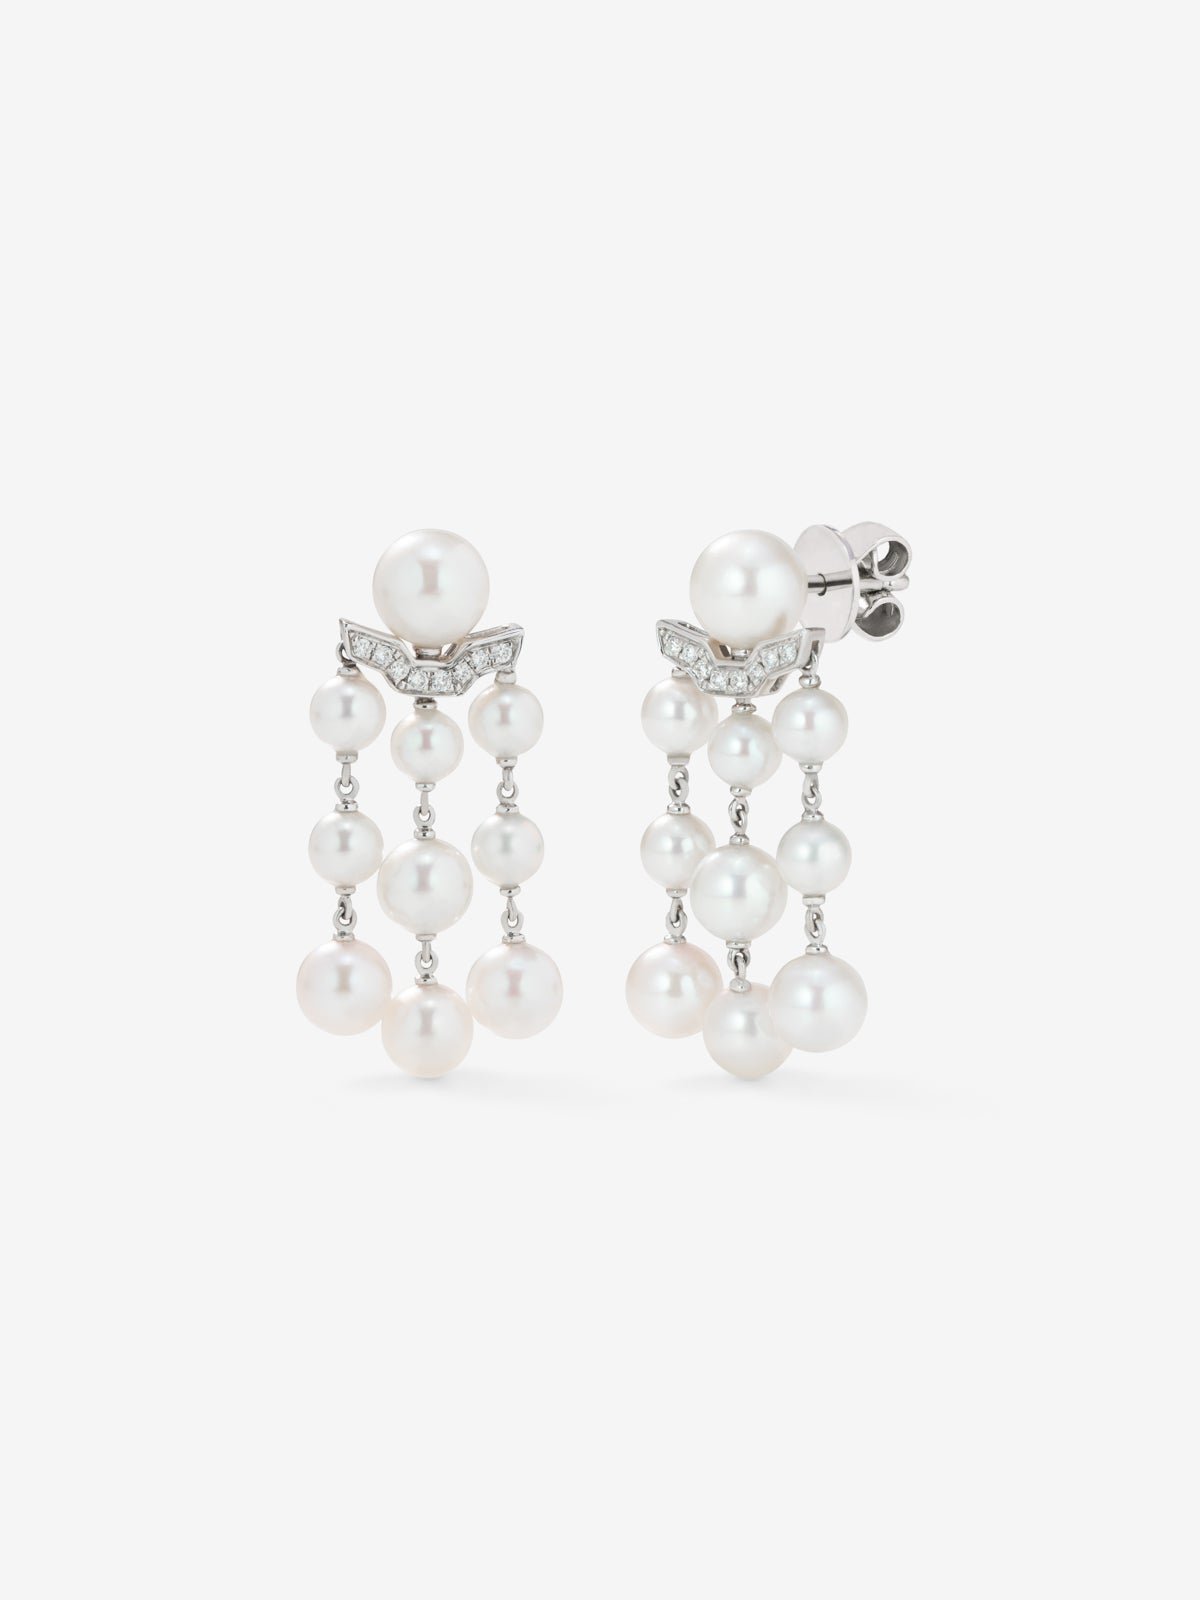 18K white gold earrings with 20 Akoya pearls and 16 brilliant-cut diamonds with a total of 0.08 cts